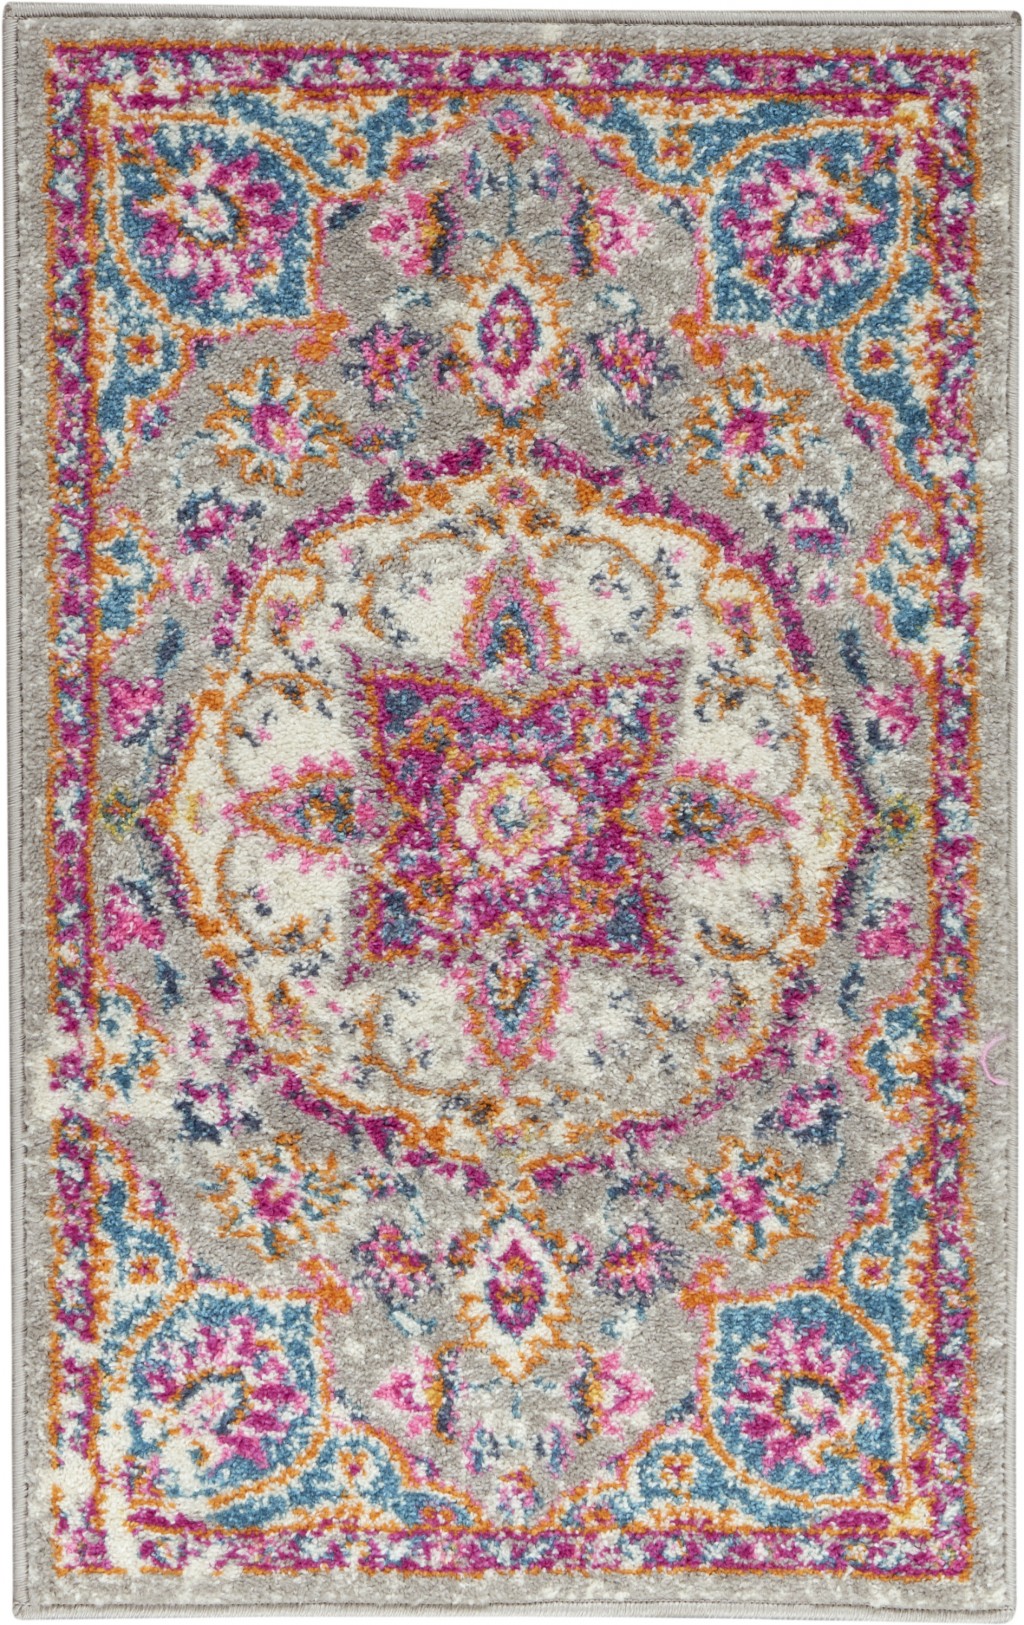 2' X 3' Pink And Gray Power Loom Area Rug-385516-1